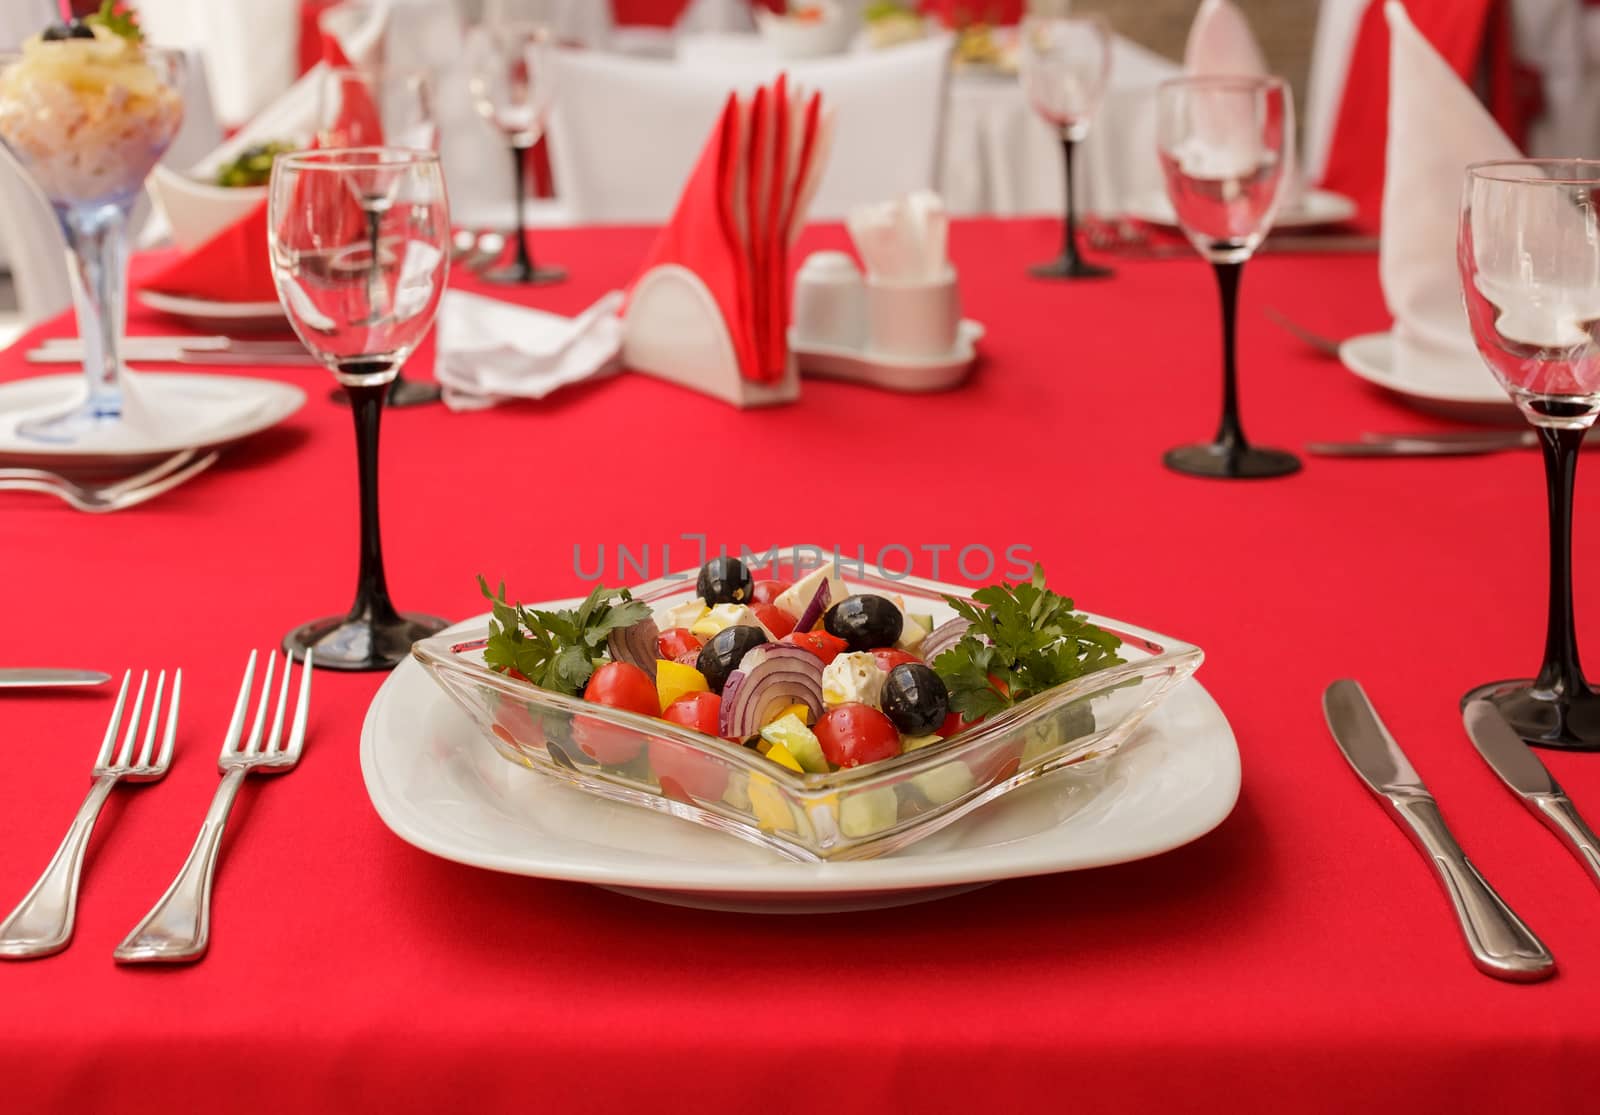 Salad of fresh vegetables, served on the table. Style tricolor - red, white, black.